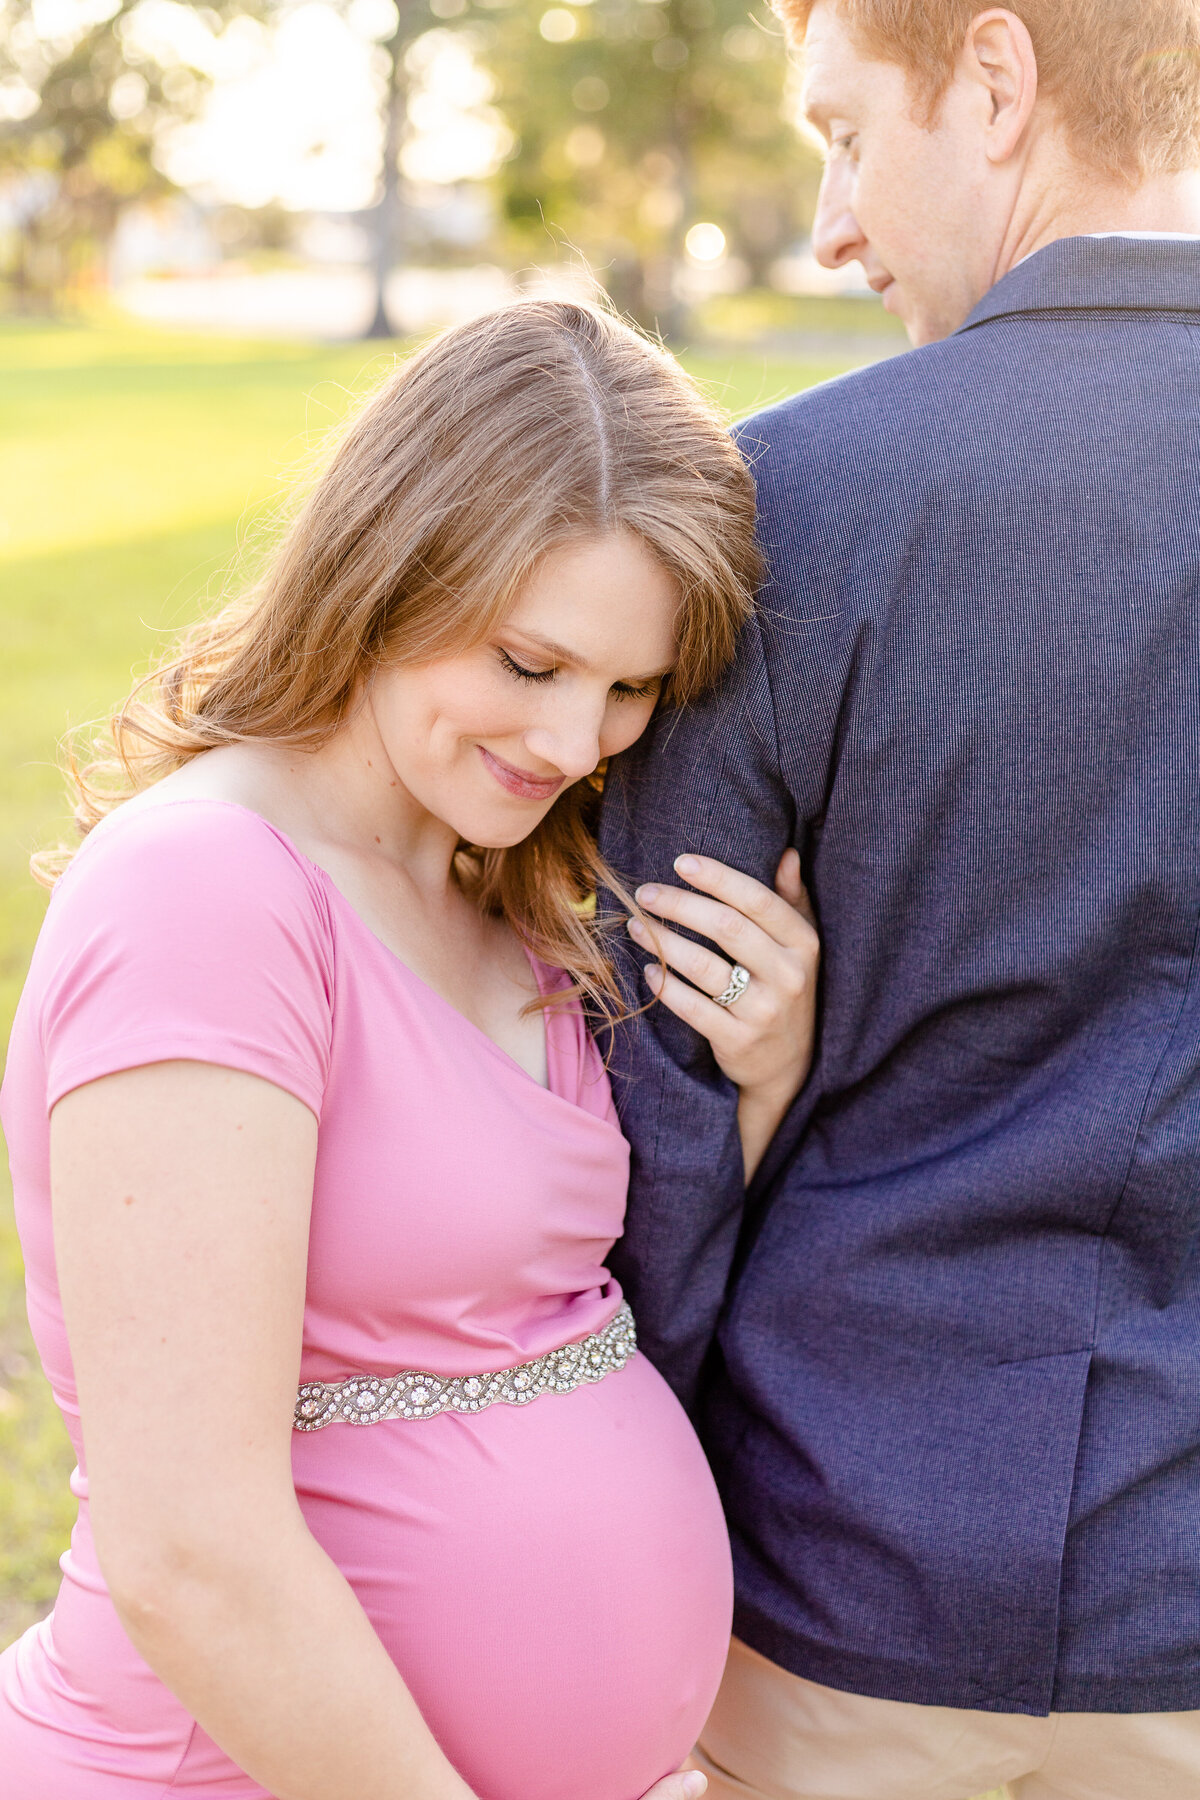 Mom to be posing with her husband during maternity session